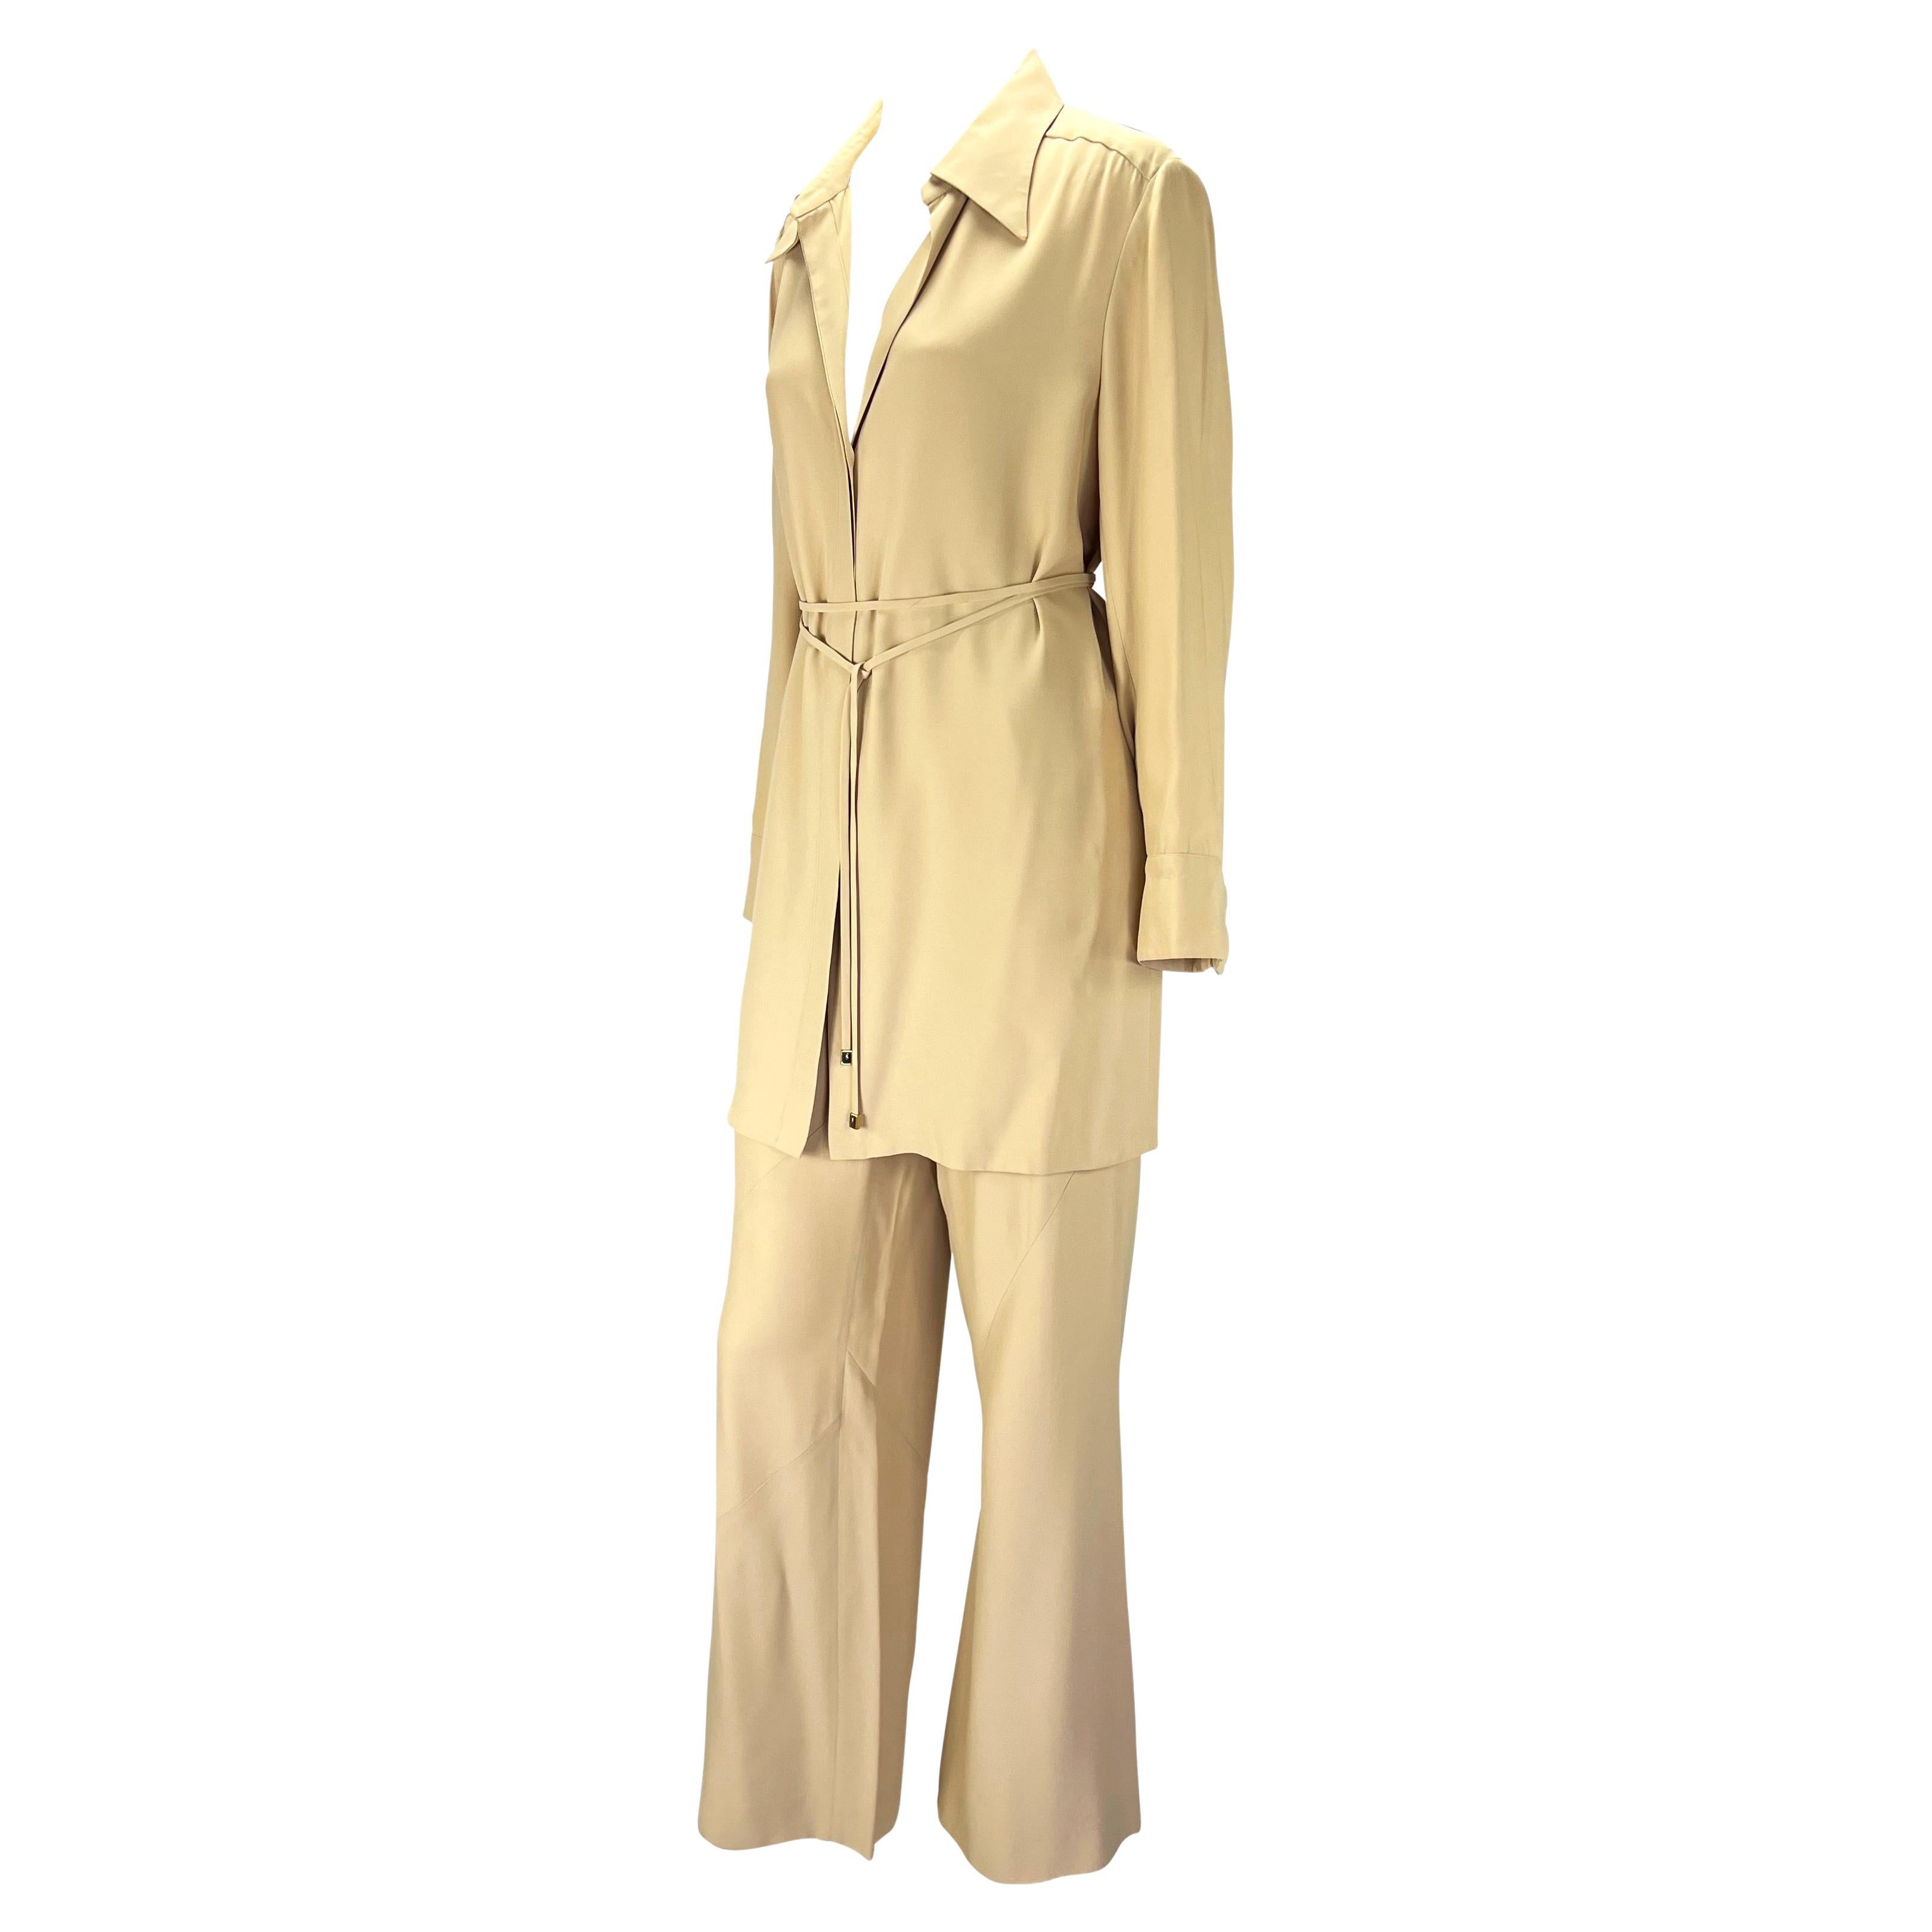 Presenting an incredible beige Gucci pant set, designed by Tom Ford. From the Spring/Summer 1997 collection, this matching two-piece set is made up of an oversized tunic and matching pants. The button closure stops halfway up the front of the tunic